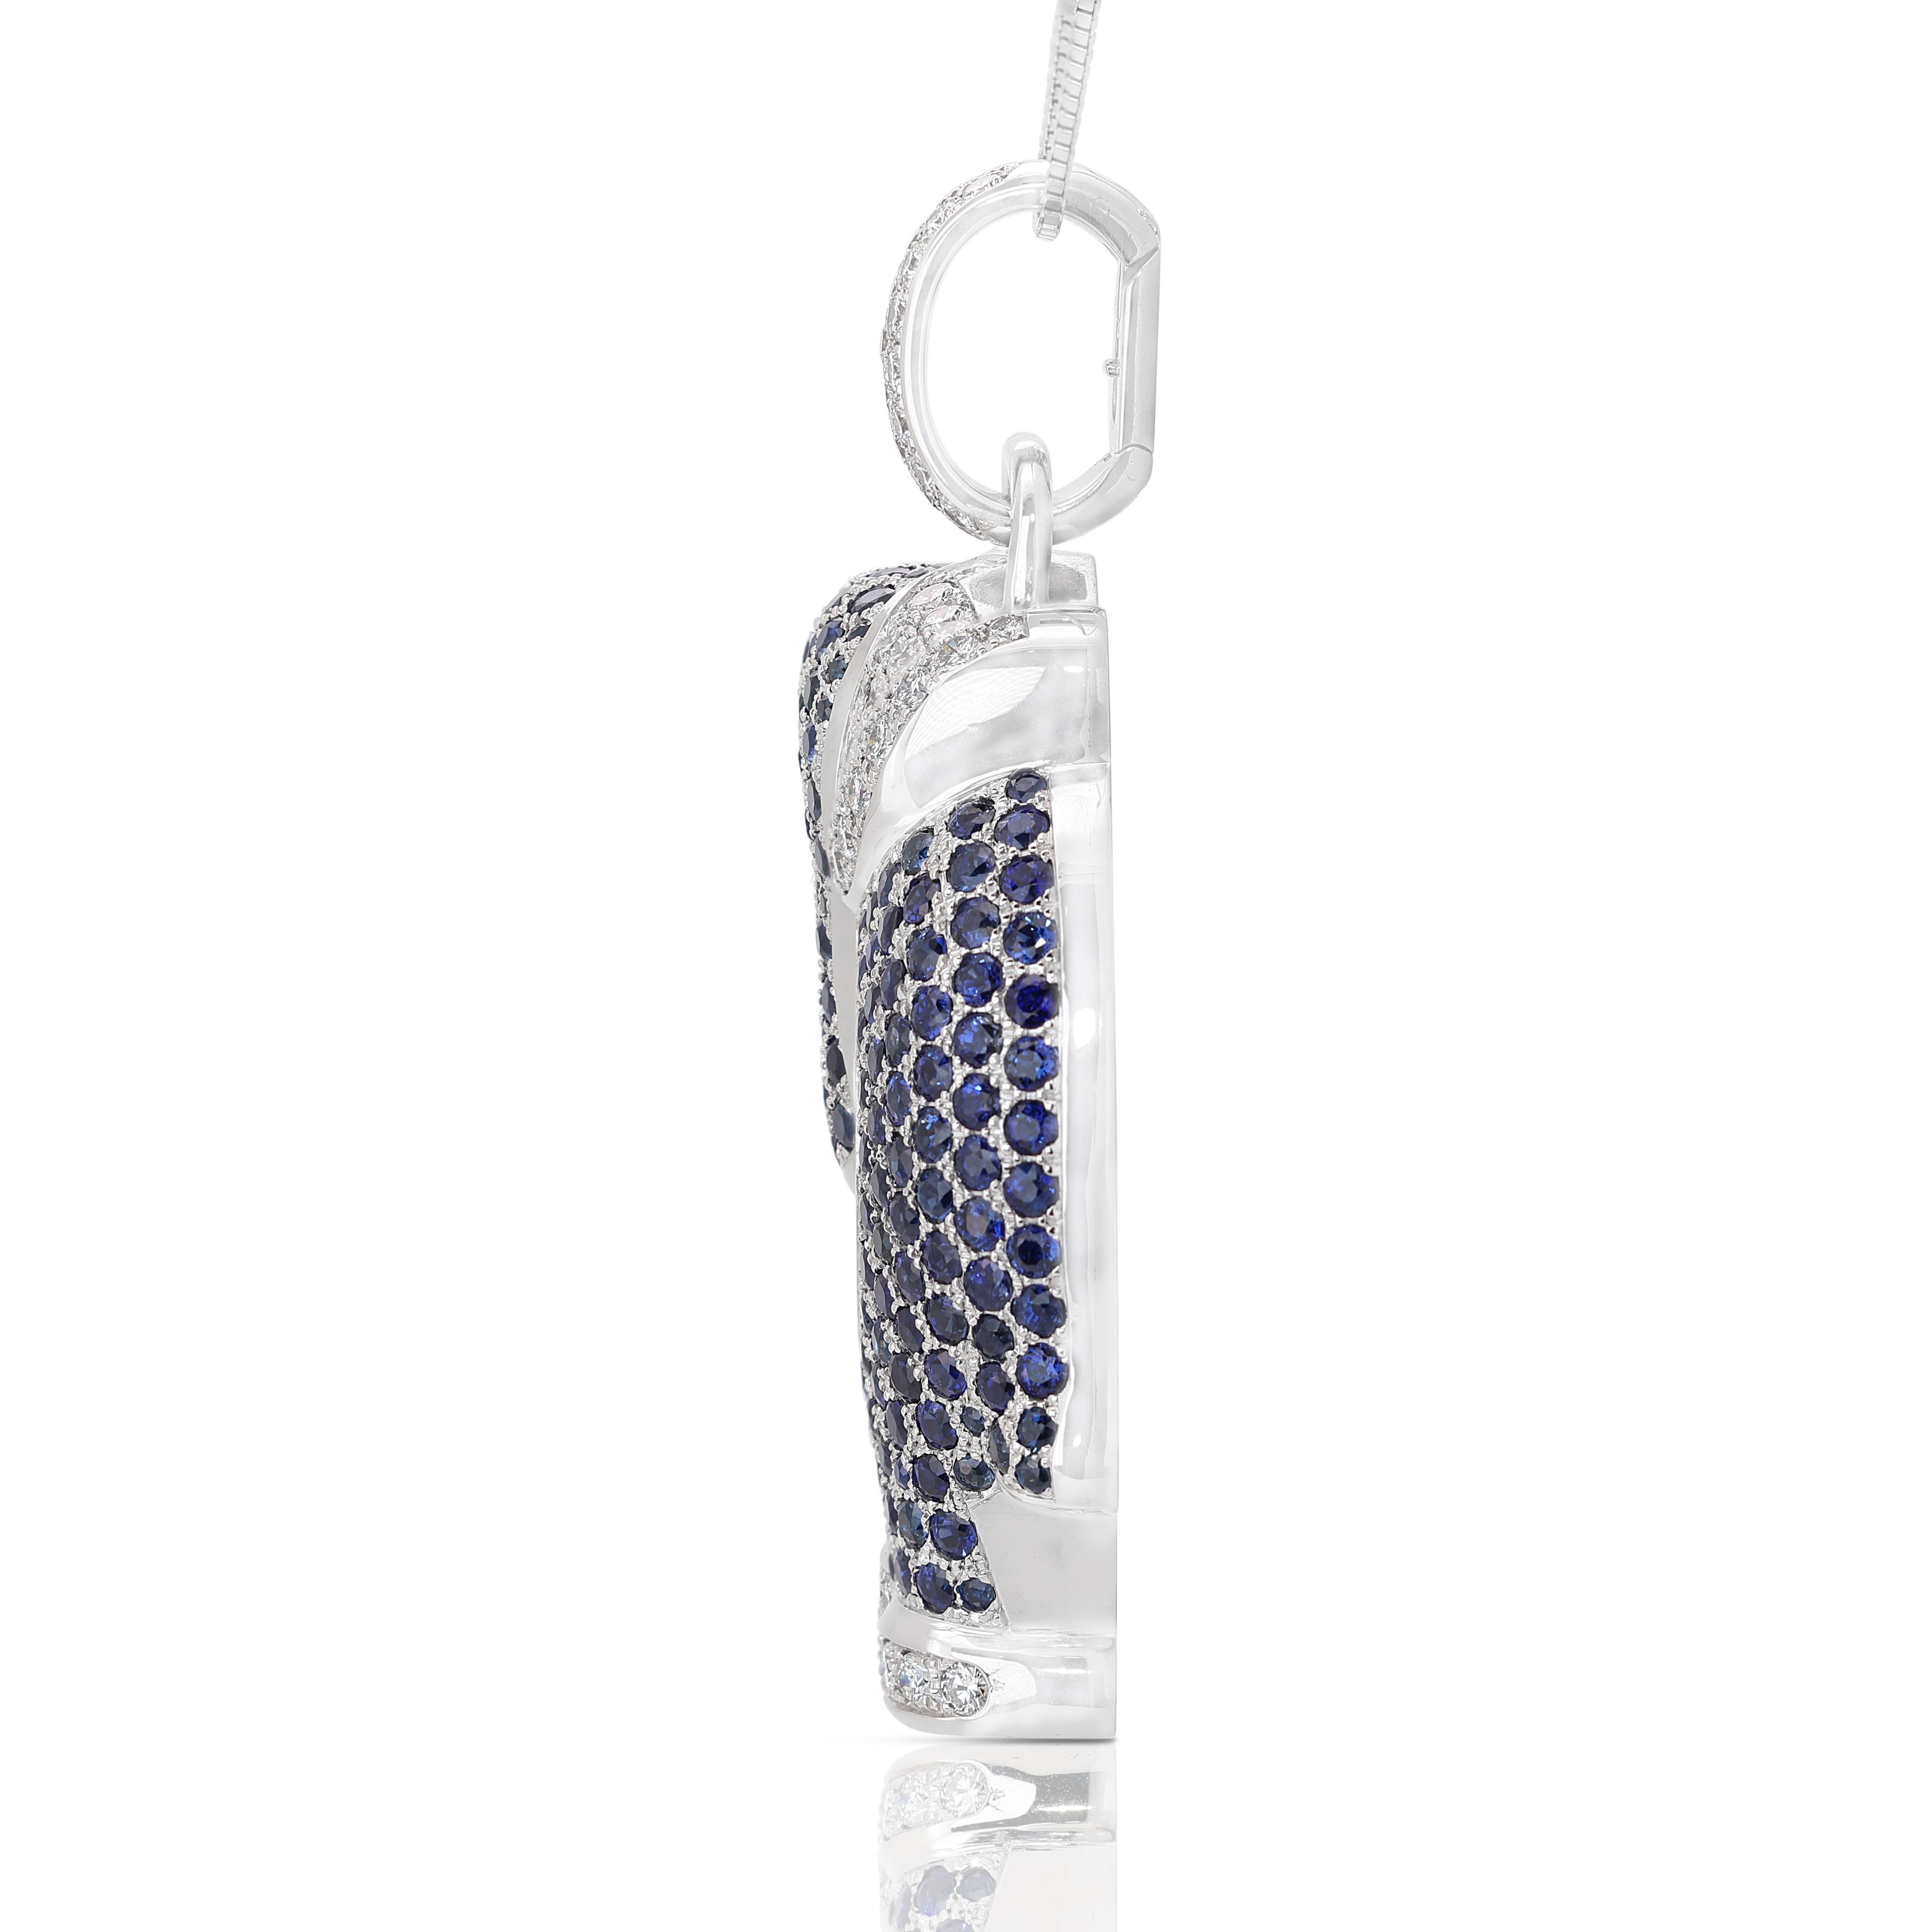 Stunning 7.02ct Sapphire & Diamond Pendant in 18K White Gold(Chain not included) In Excellent Condition For Sale In רמת גן, IL